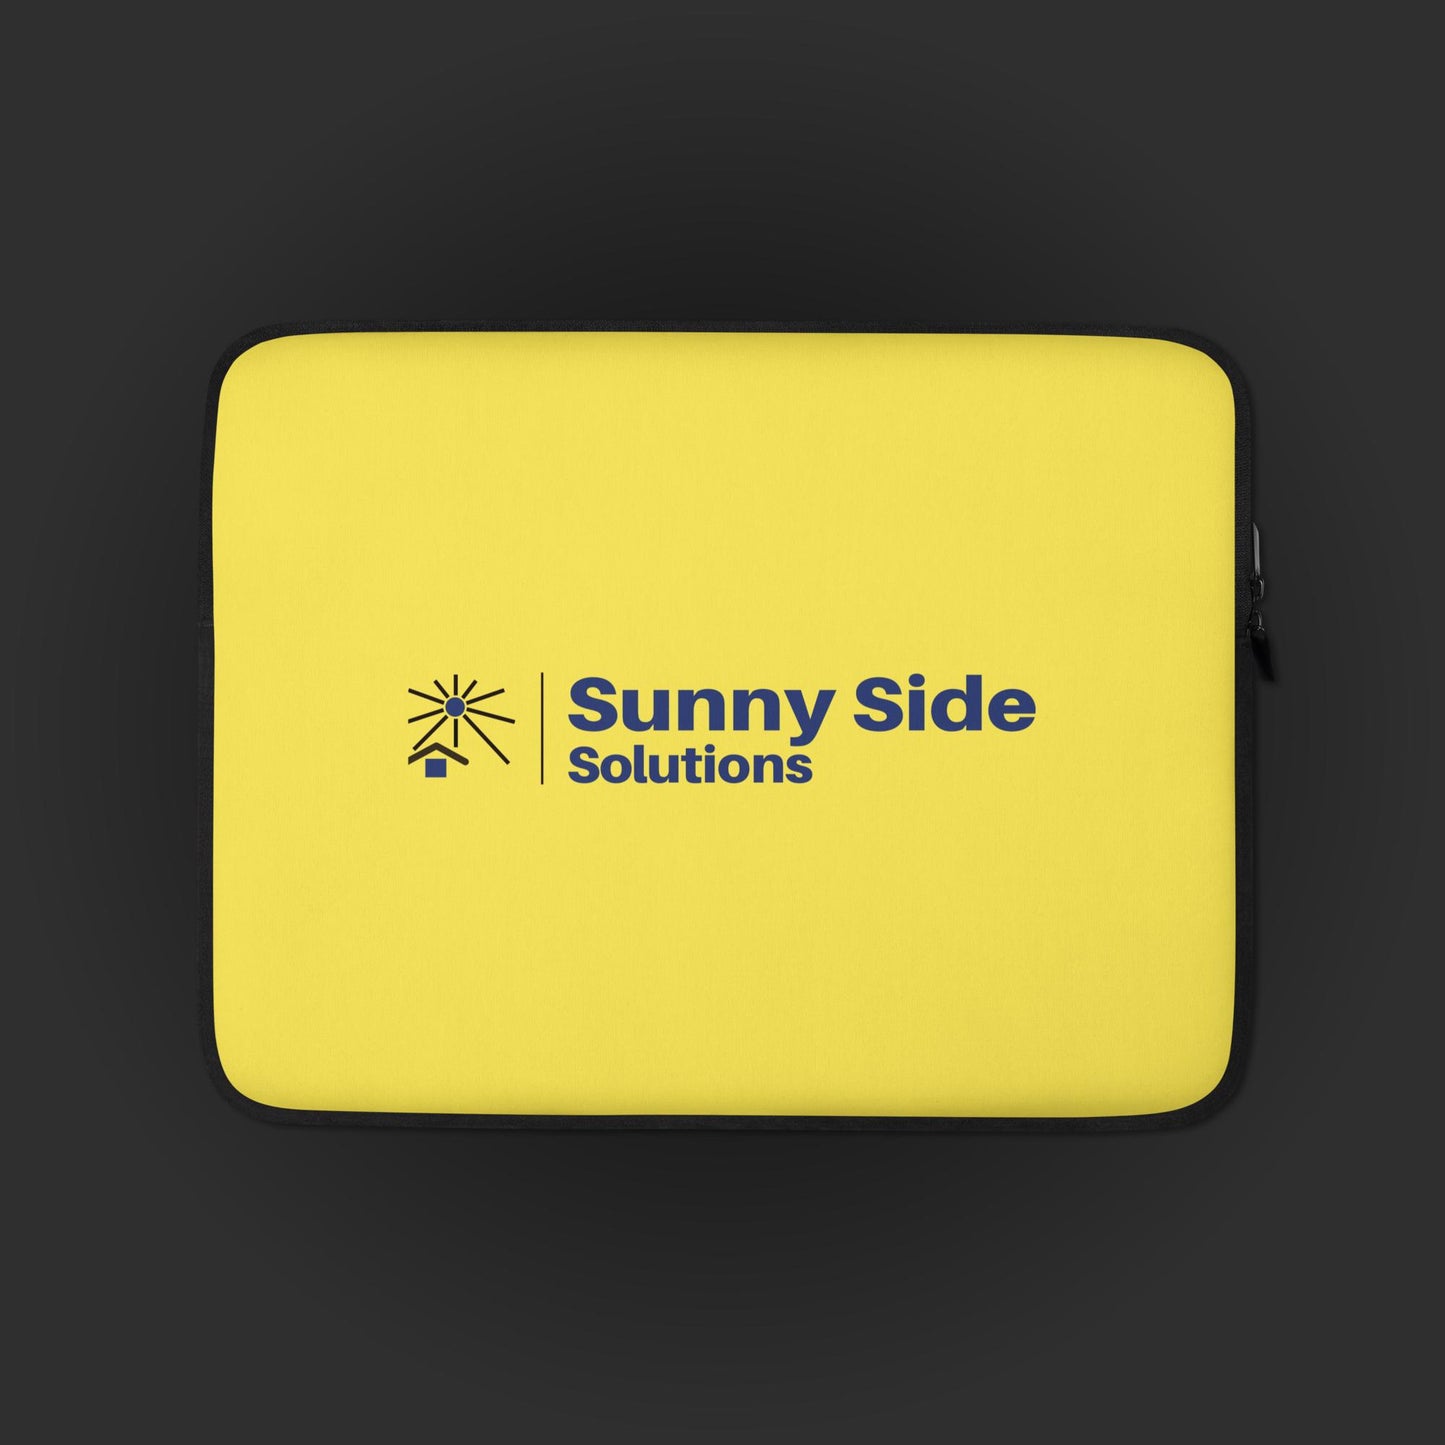 Sunny Side Solutions- Laptop Sleeve